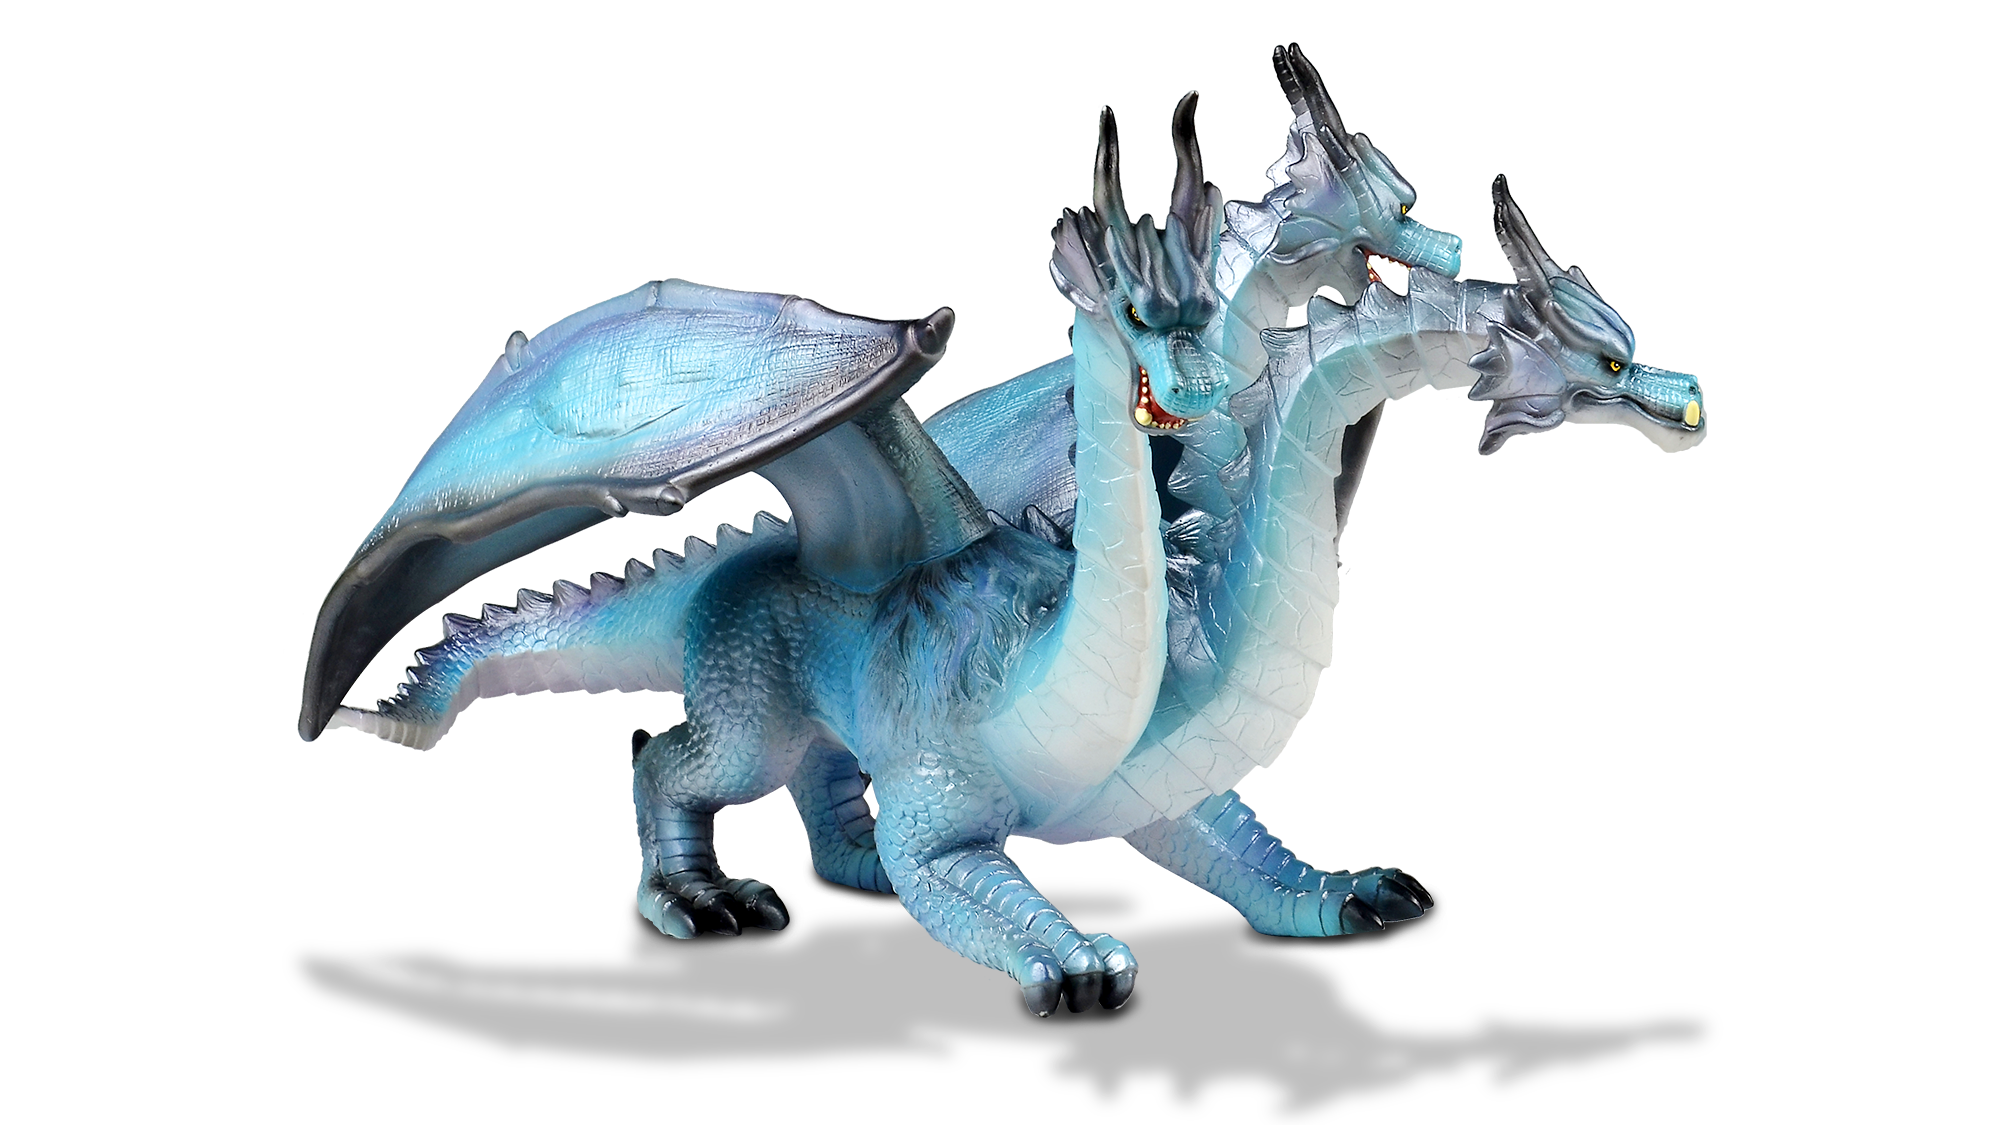  Toys model for gift Three heads dragon toy model 